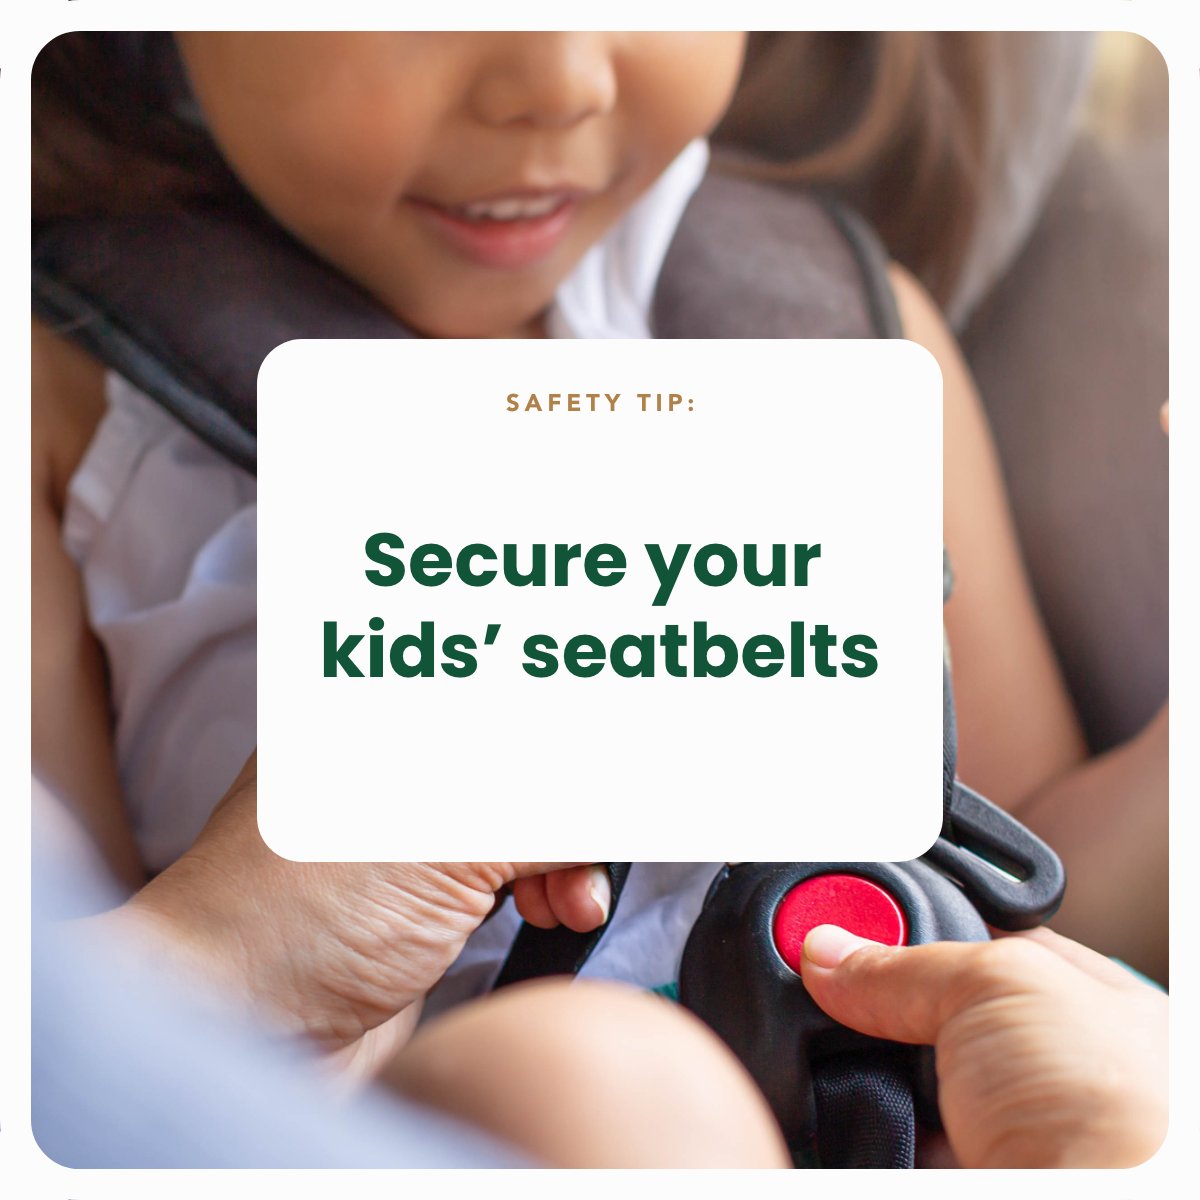 From school runs to road trips, make sure your little ones have their seatbelts on - and set an example by doing the same!

#FidelitySecureDrive #VehicleTracking #YourDrivingCompanion #SafetyTips